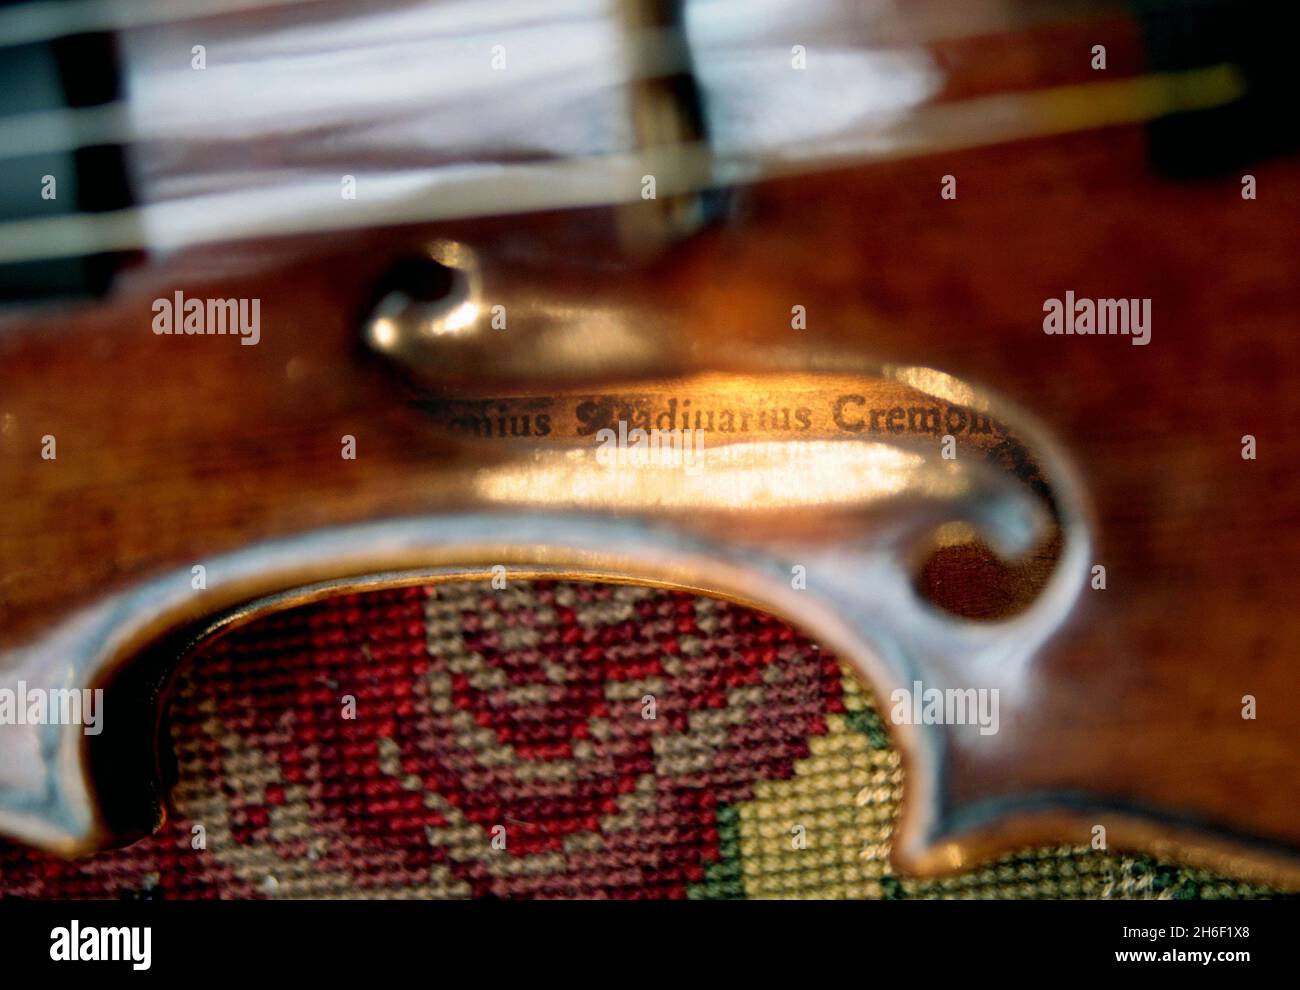 The Soloman, Ex-Lambert Stradivari violin dating from 1729 which is expected to fetch between $1,000,000 and $1,500,000 when it is auctioned in the Christie's Fine Musical Instruments sale in New York on Monday 2 April 2007. Stock Photo